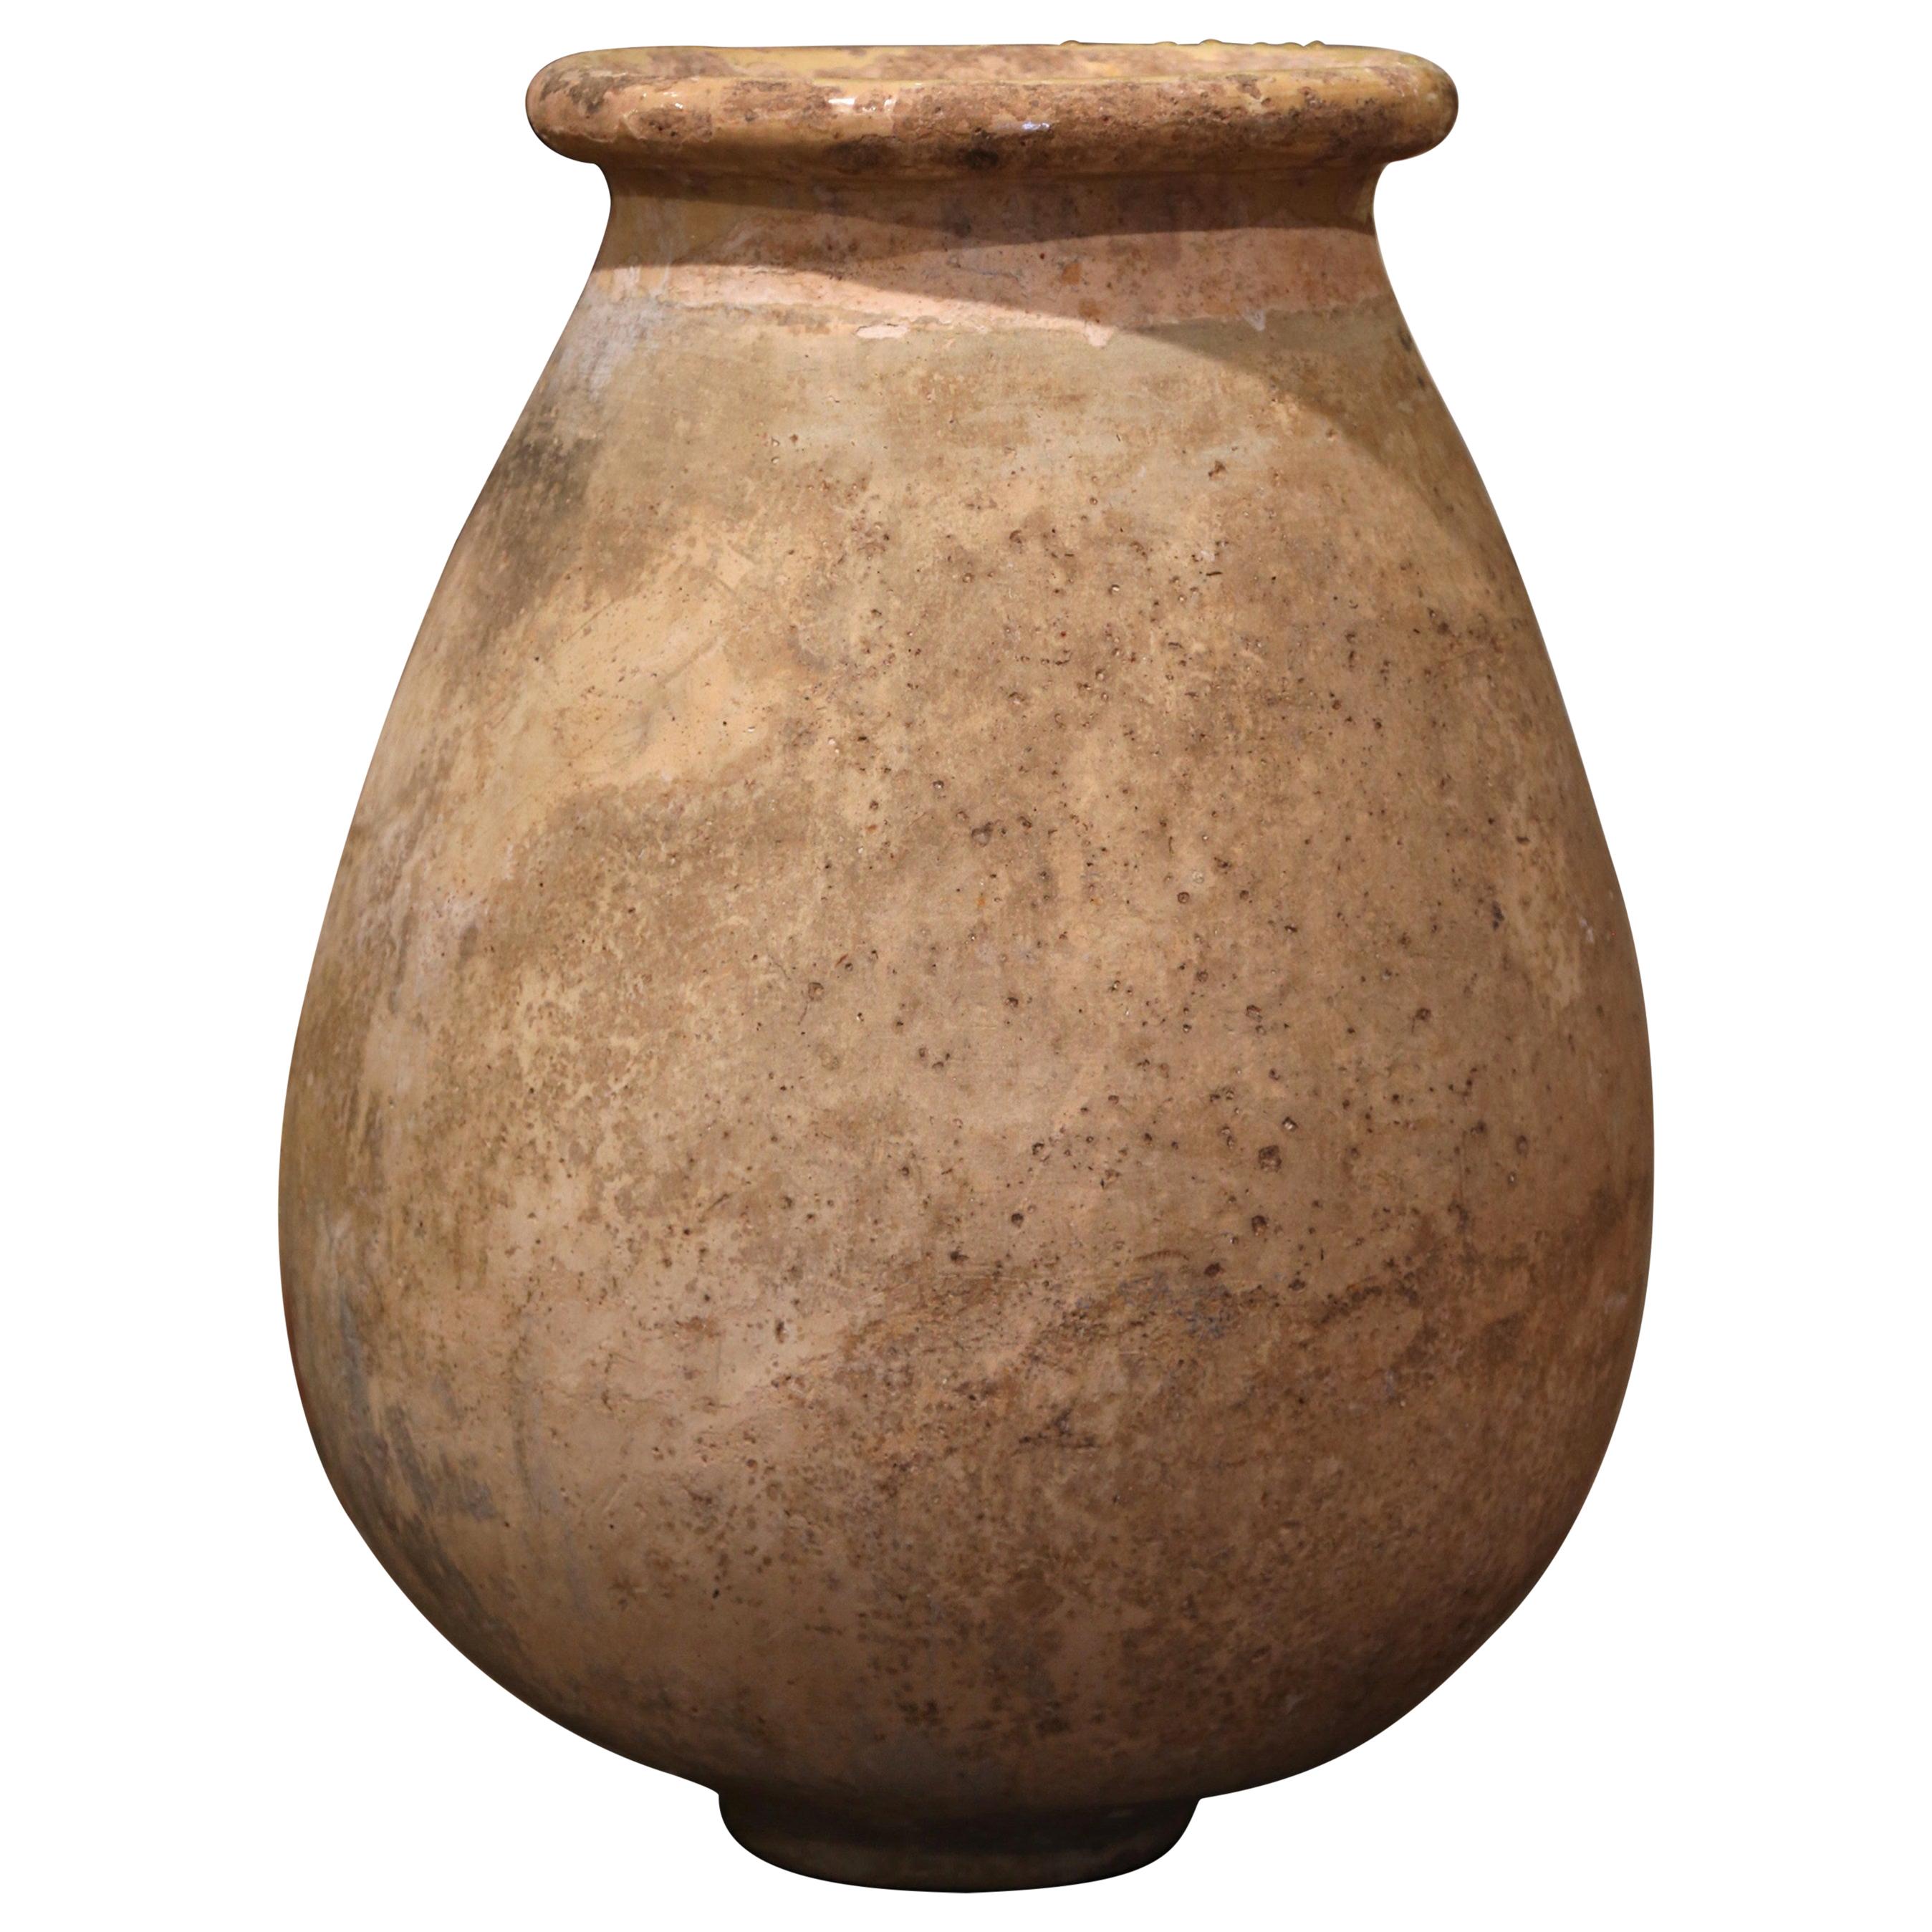 Large Mid-19th Century French Terracotta Olive Jar from Provence